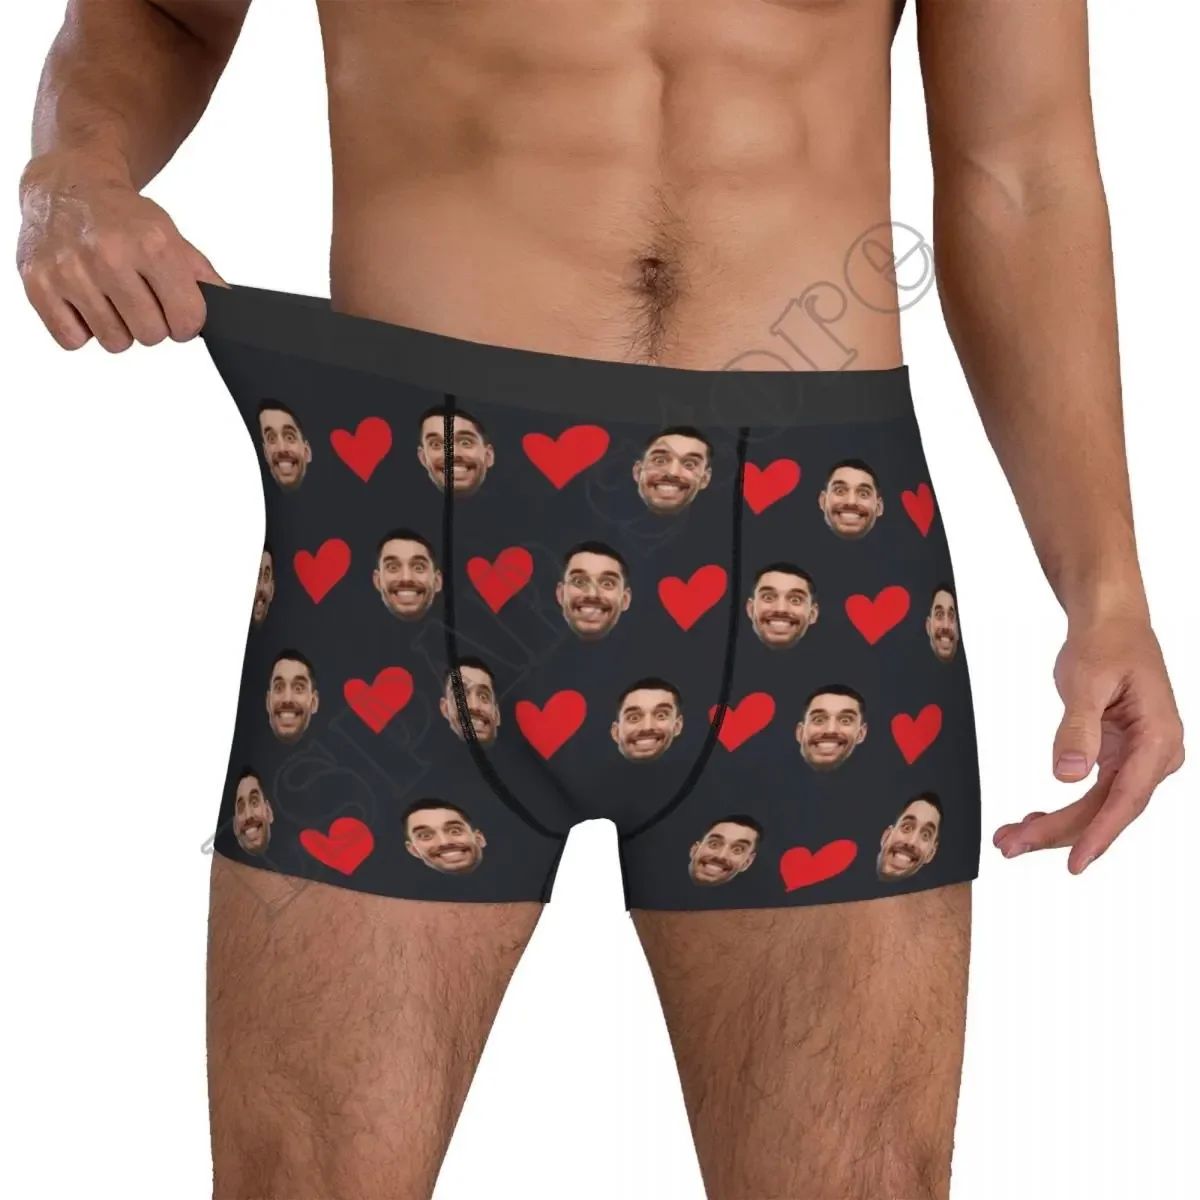 Personalized Face Photo Underwear - Custom Heart Boxer Briefs - Custom Men Briefs - Gift For Husband - Anniversary Gift for Dad